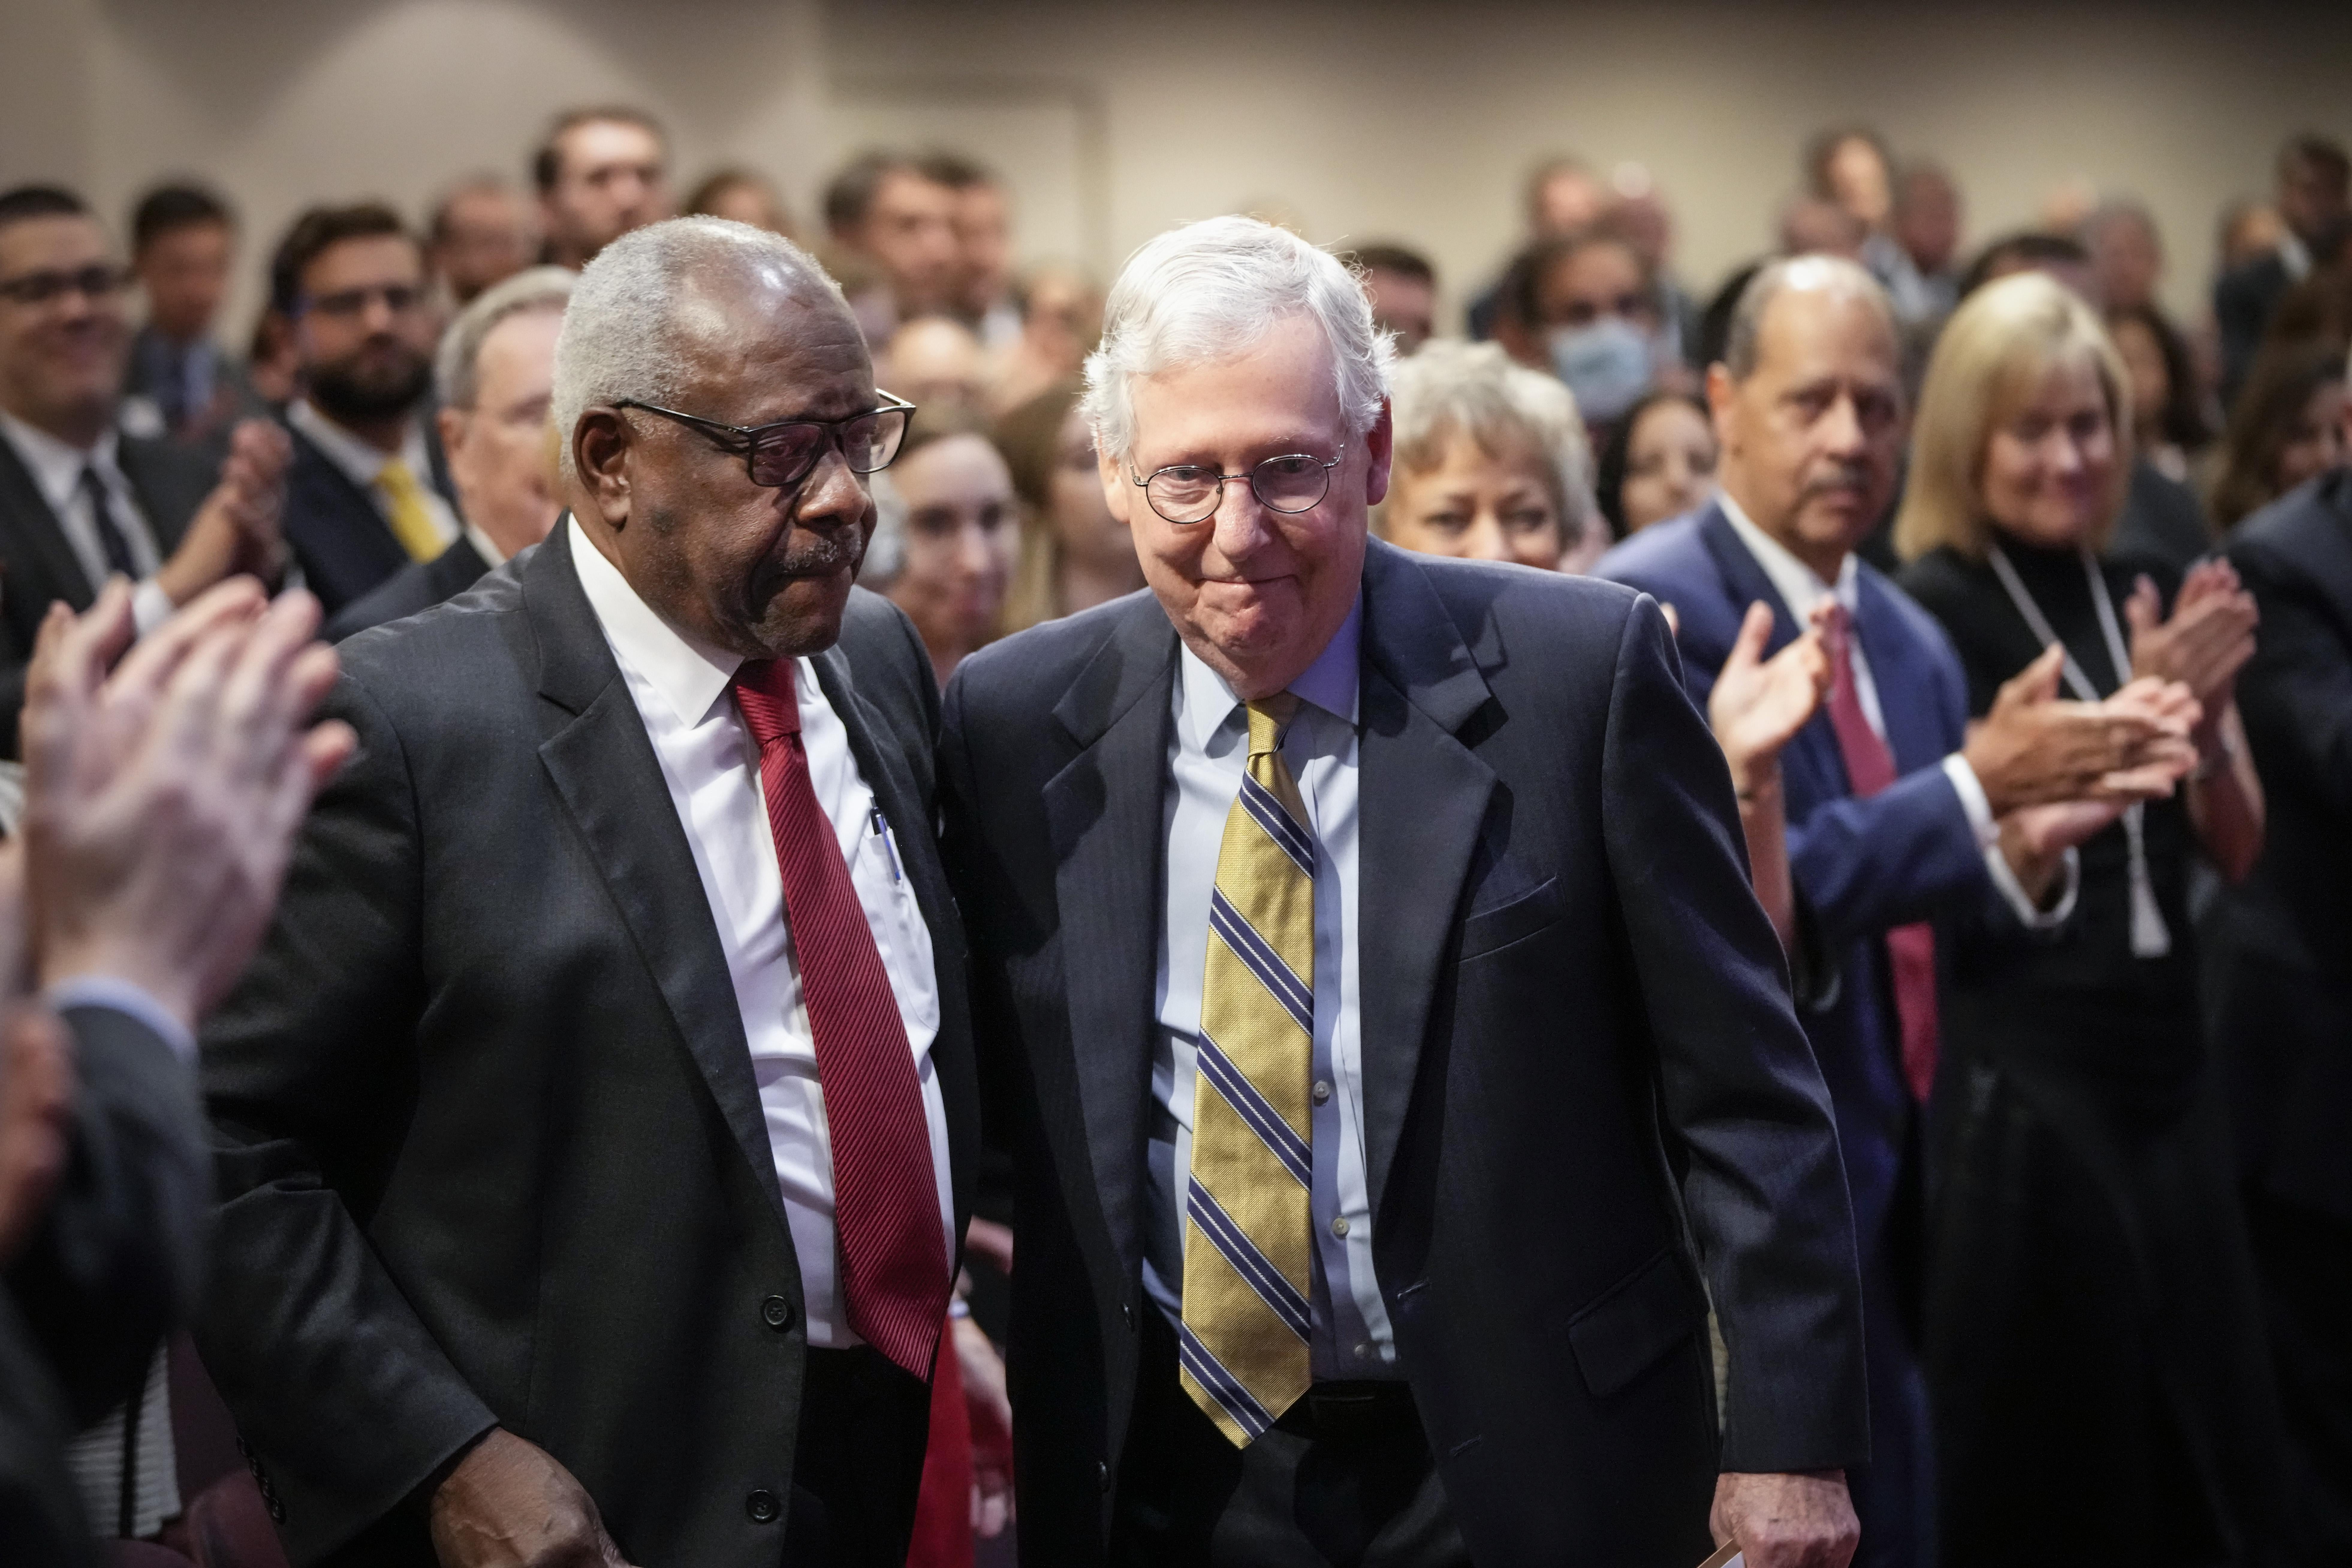 Clarence Thomas and Mitch McConnell looking amiable in a crowd.